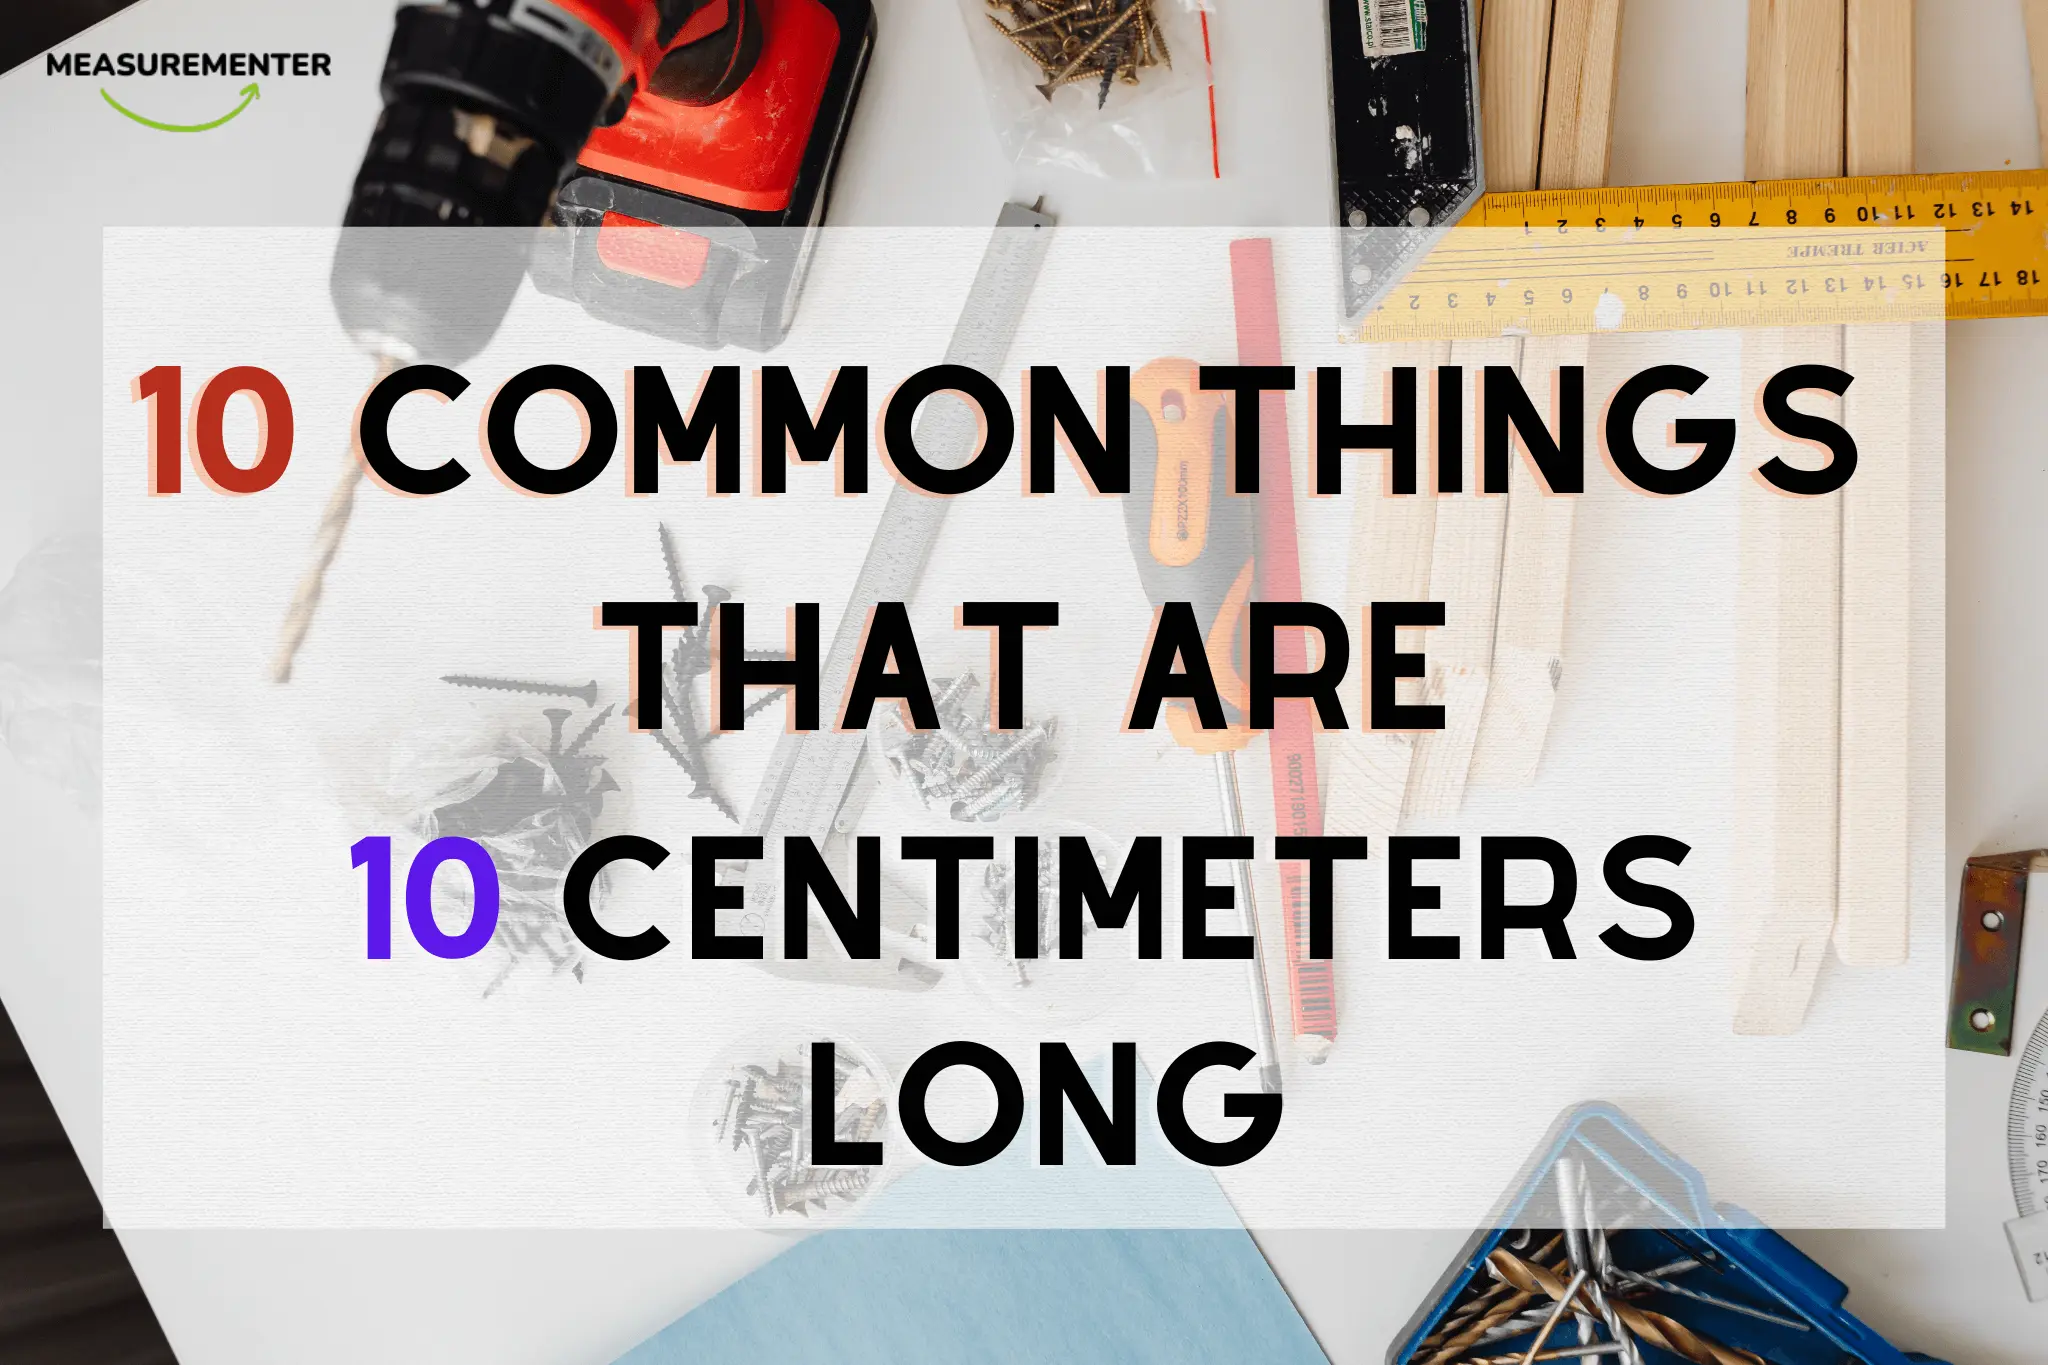 10 Common things that are 10 Centimeters long